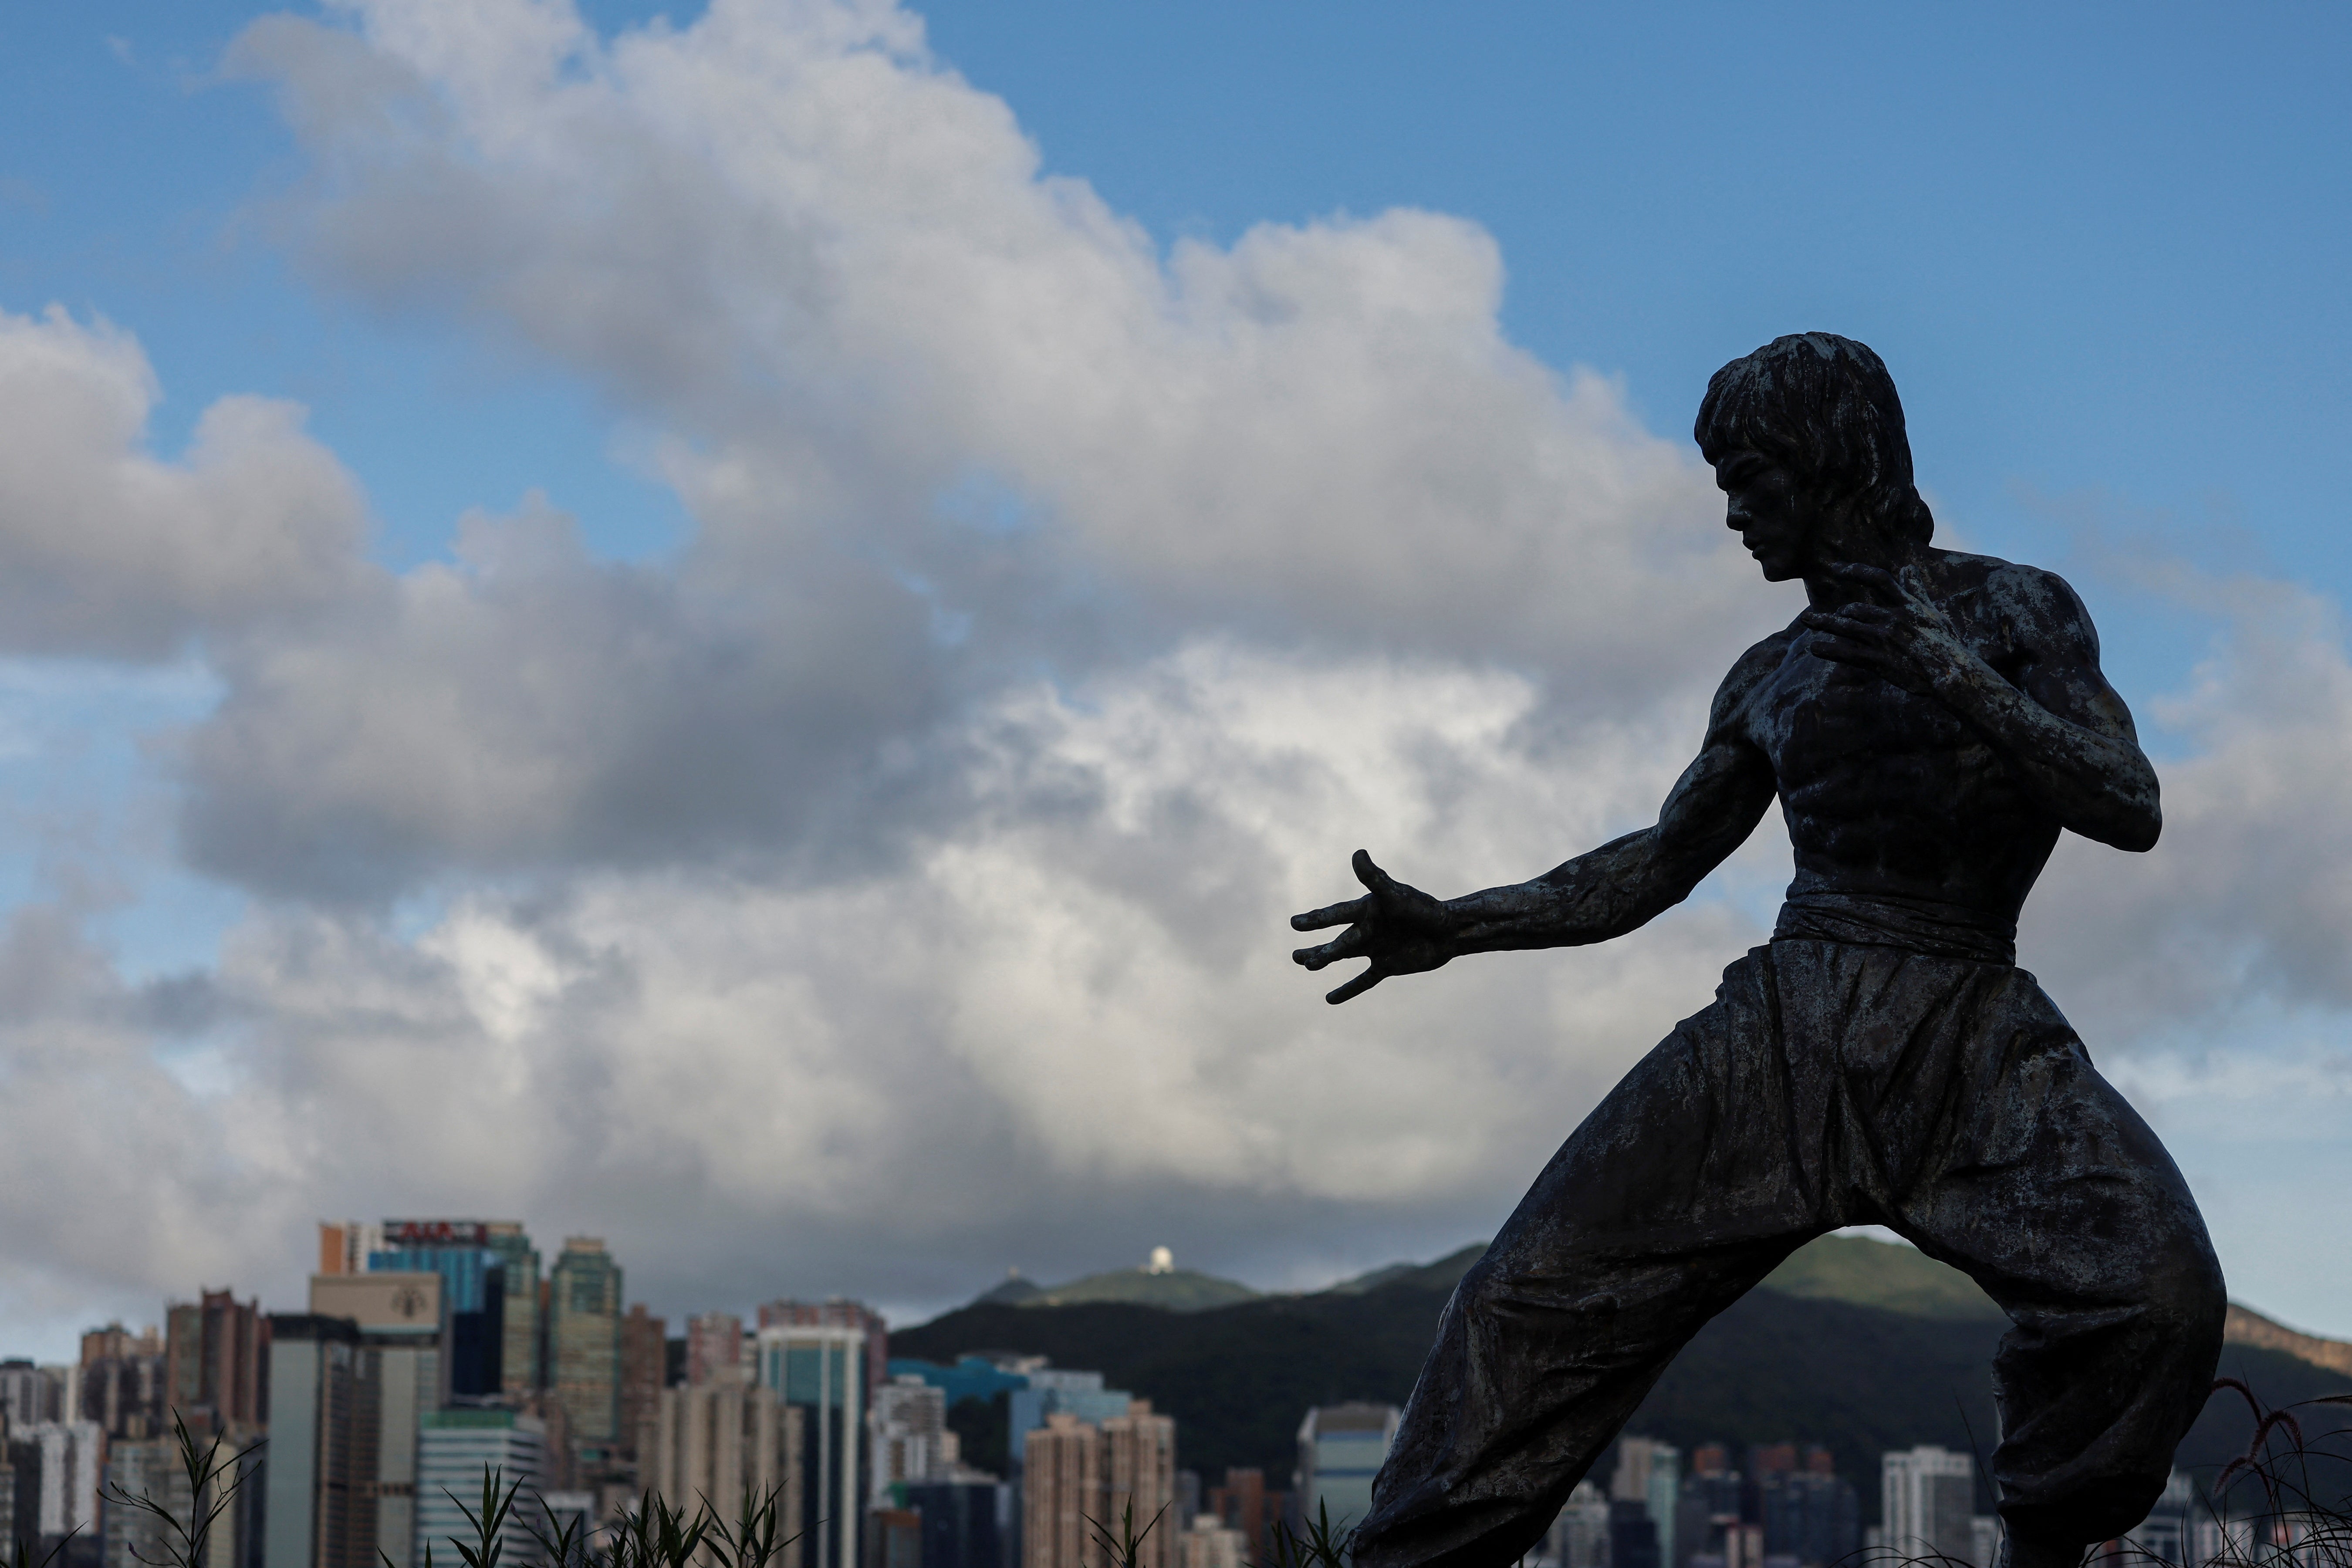 A statue of the martial artist and actor Bruce Lee is silhouetted against the skyline on the Avenue of Stars near the Tsim Sha Tsui waterfront